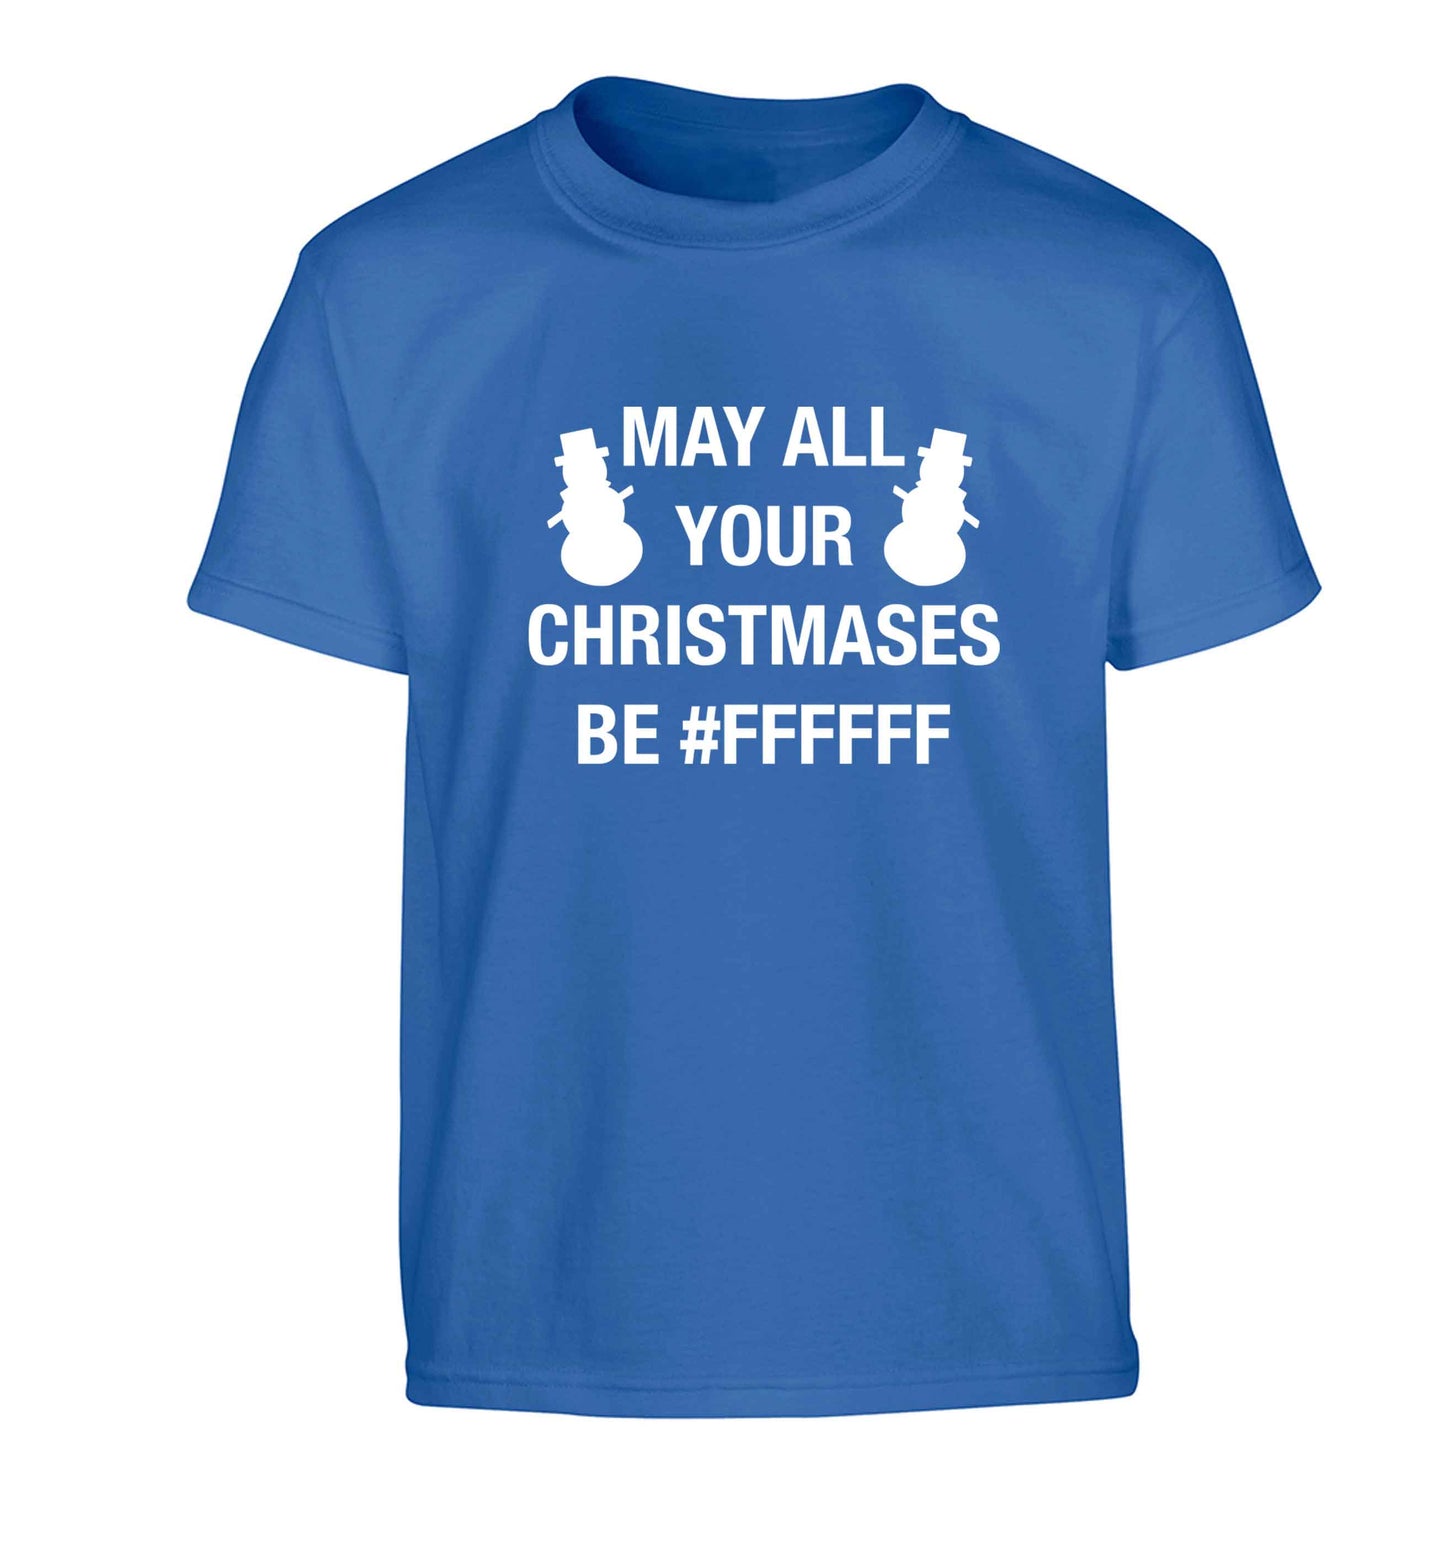 May all your Christmases be #FFFFFF Children's blue Tshirt 12-13 Years